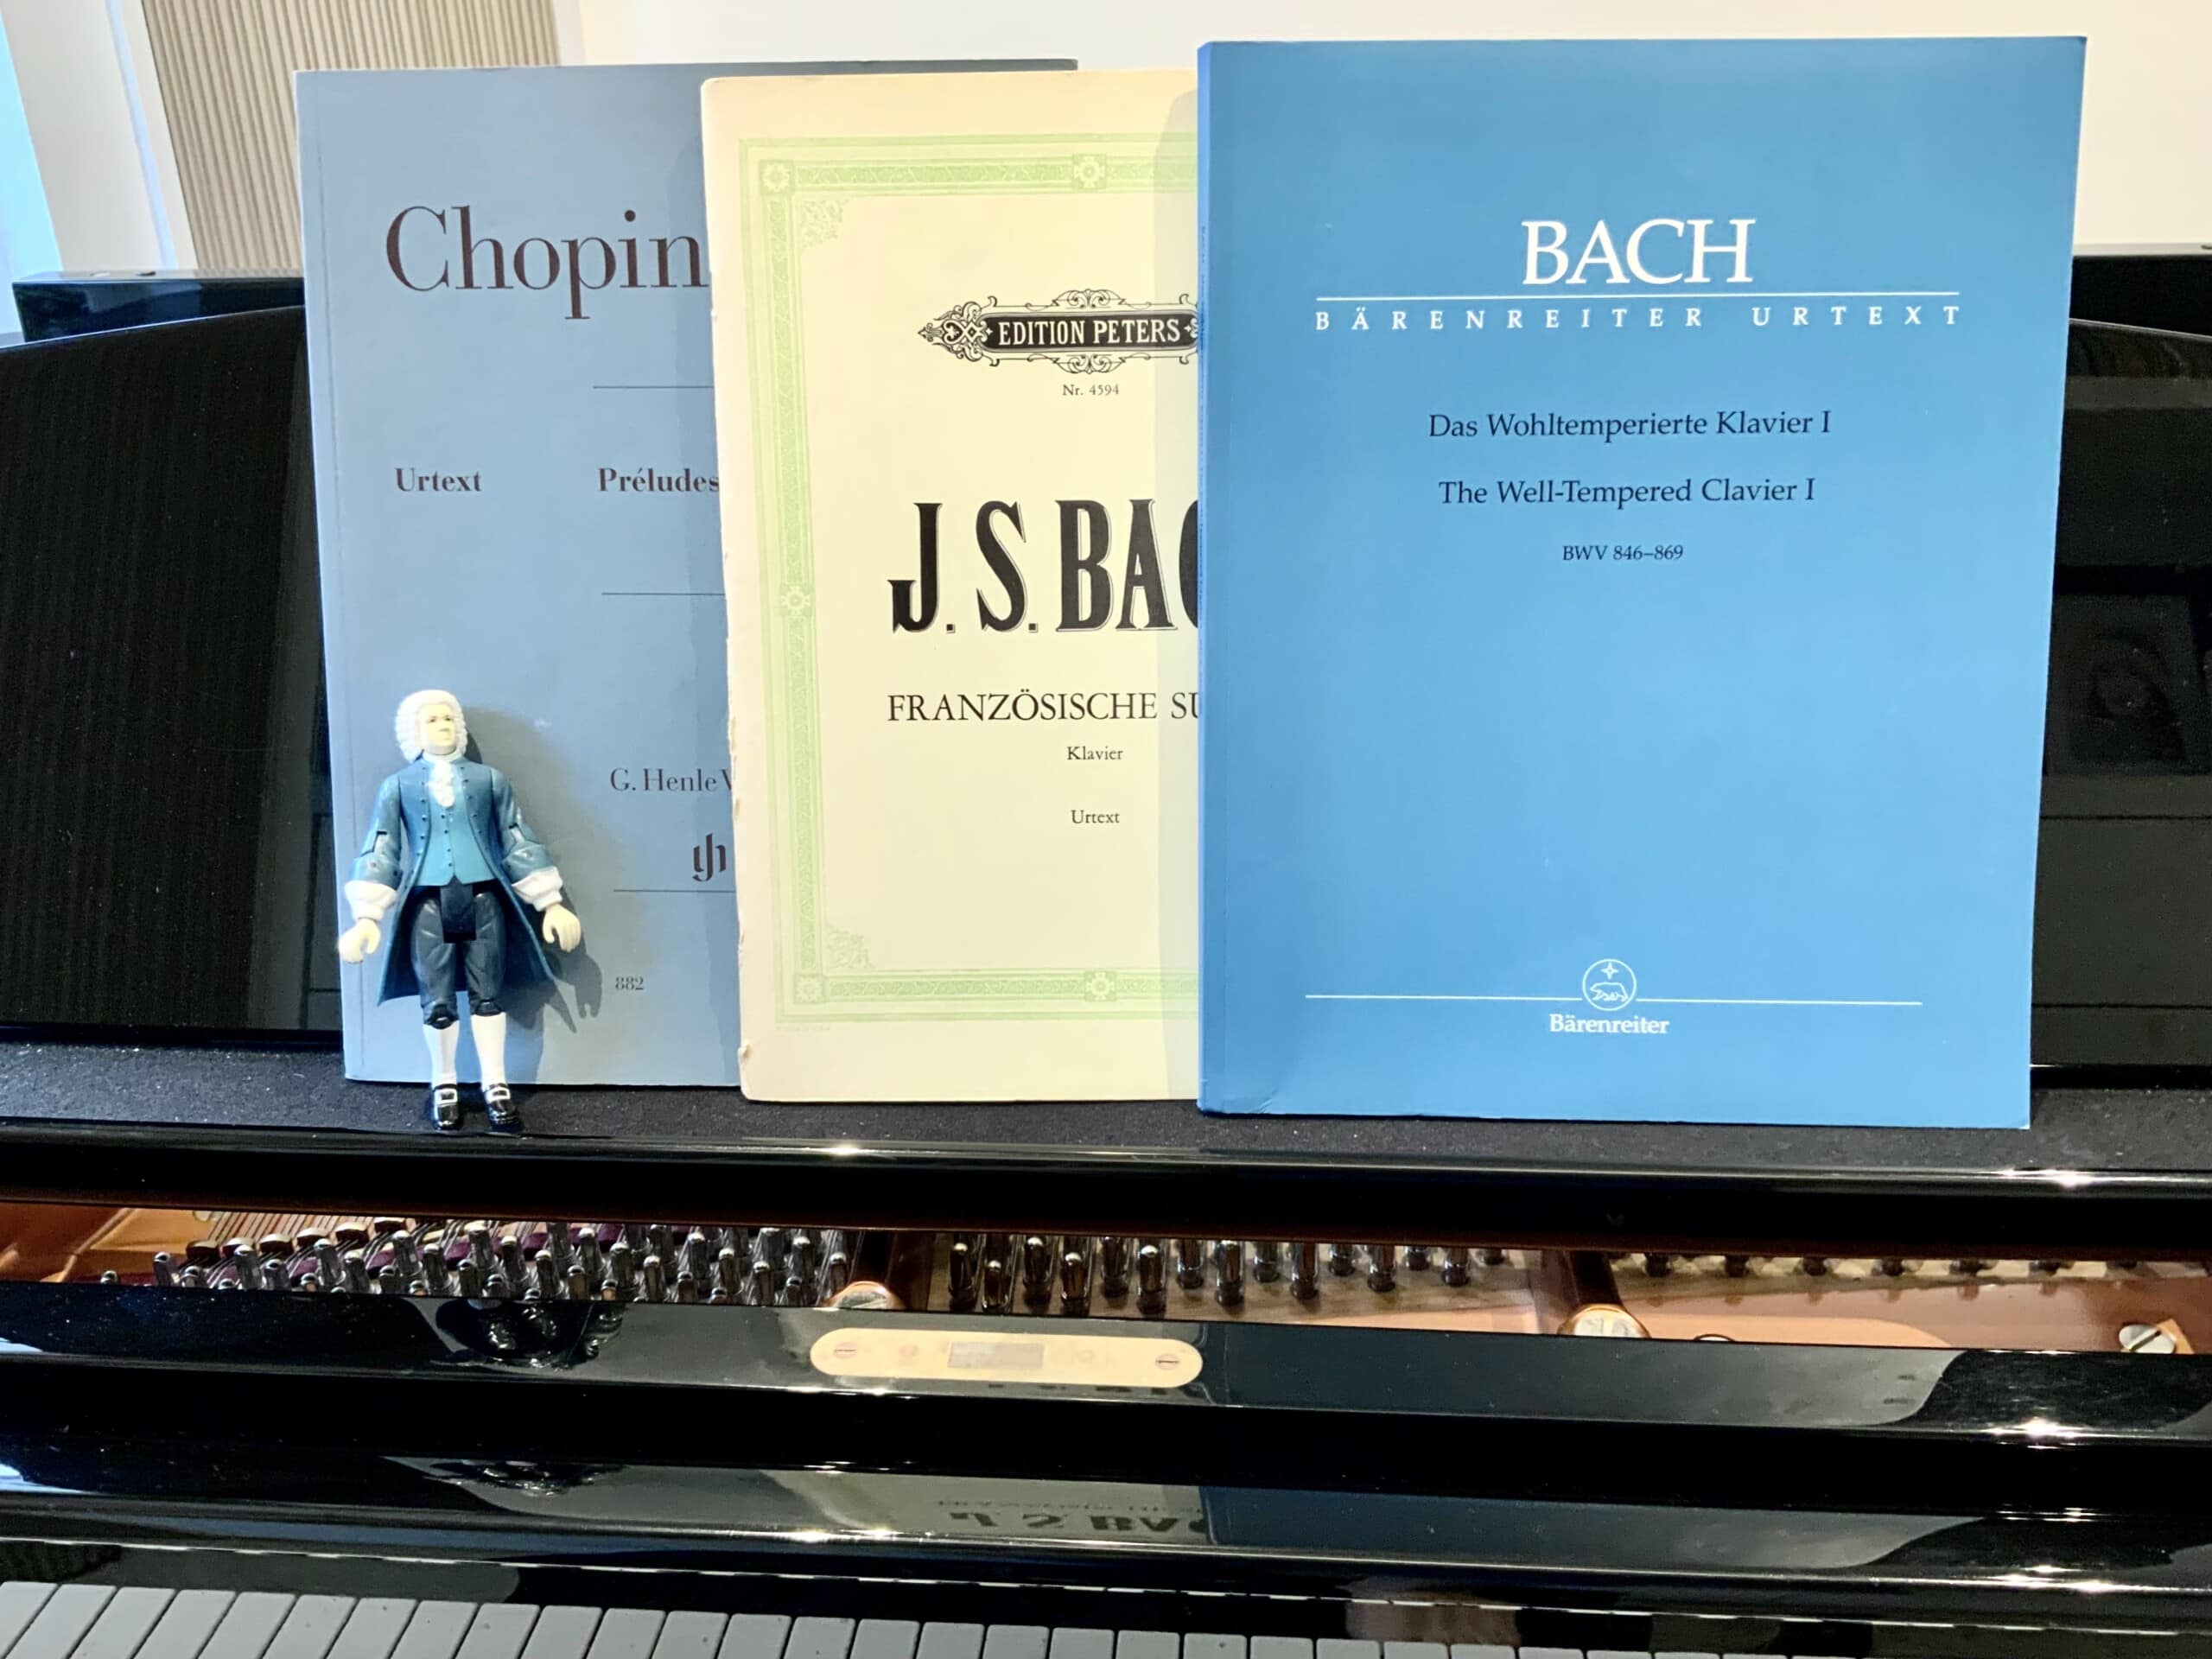 Bach action figure in front of scores on a piano